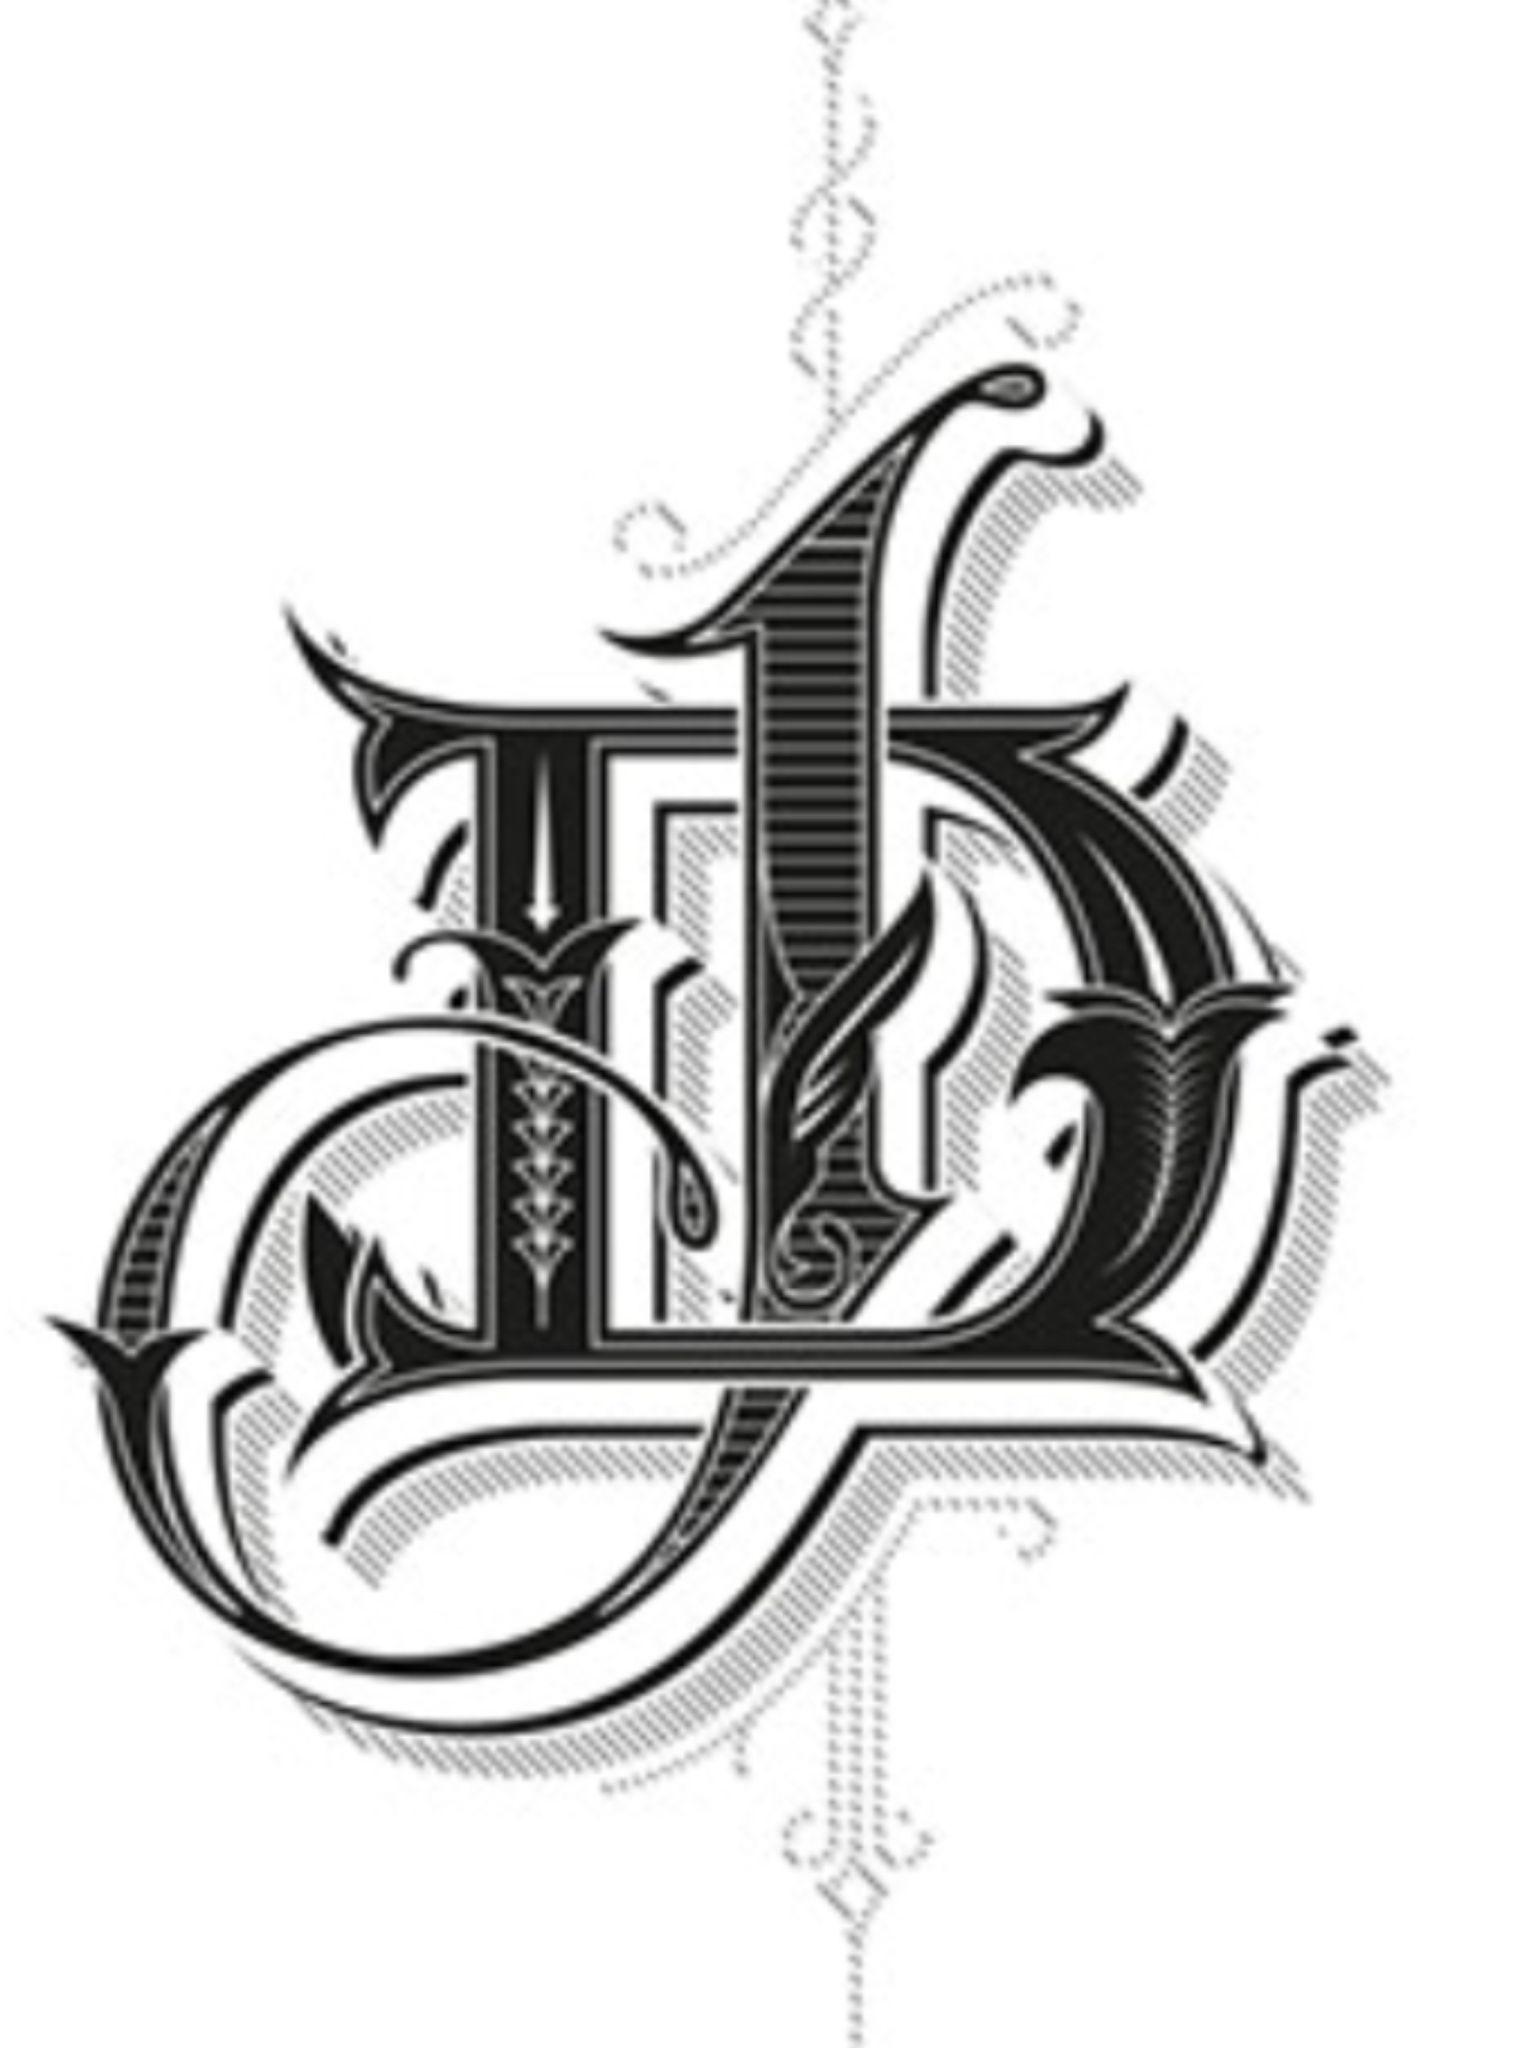 JD Logo - Pin by Dali Art Fun on JP | Pinterest | Typography, Lettering and Logos